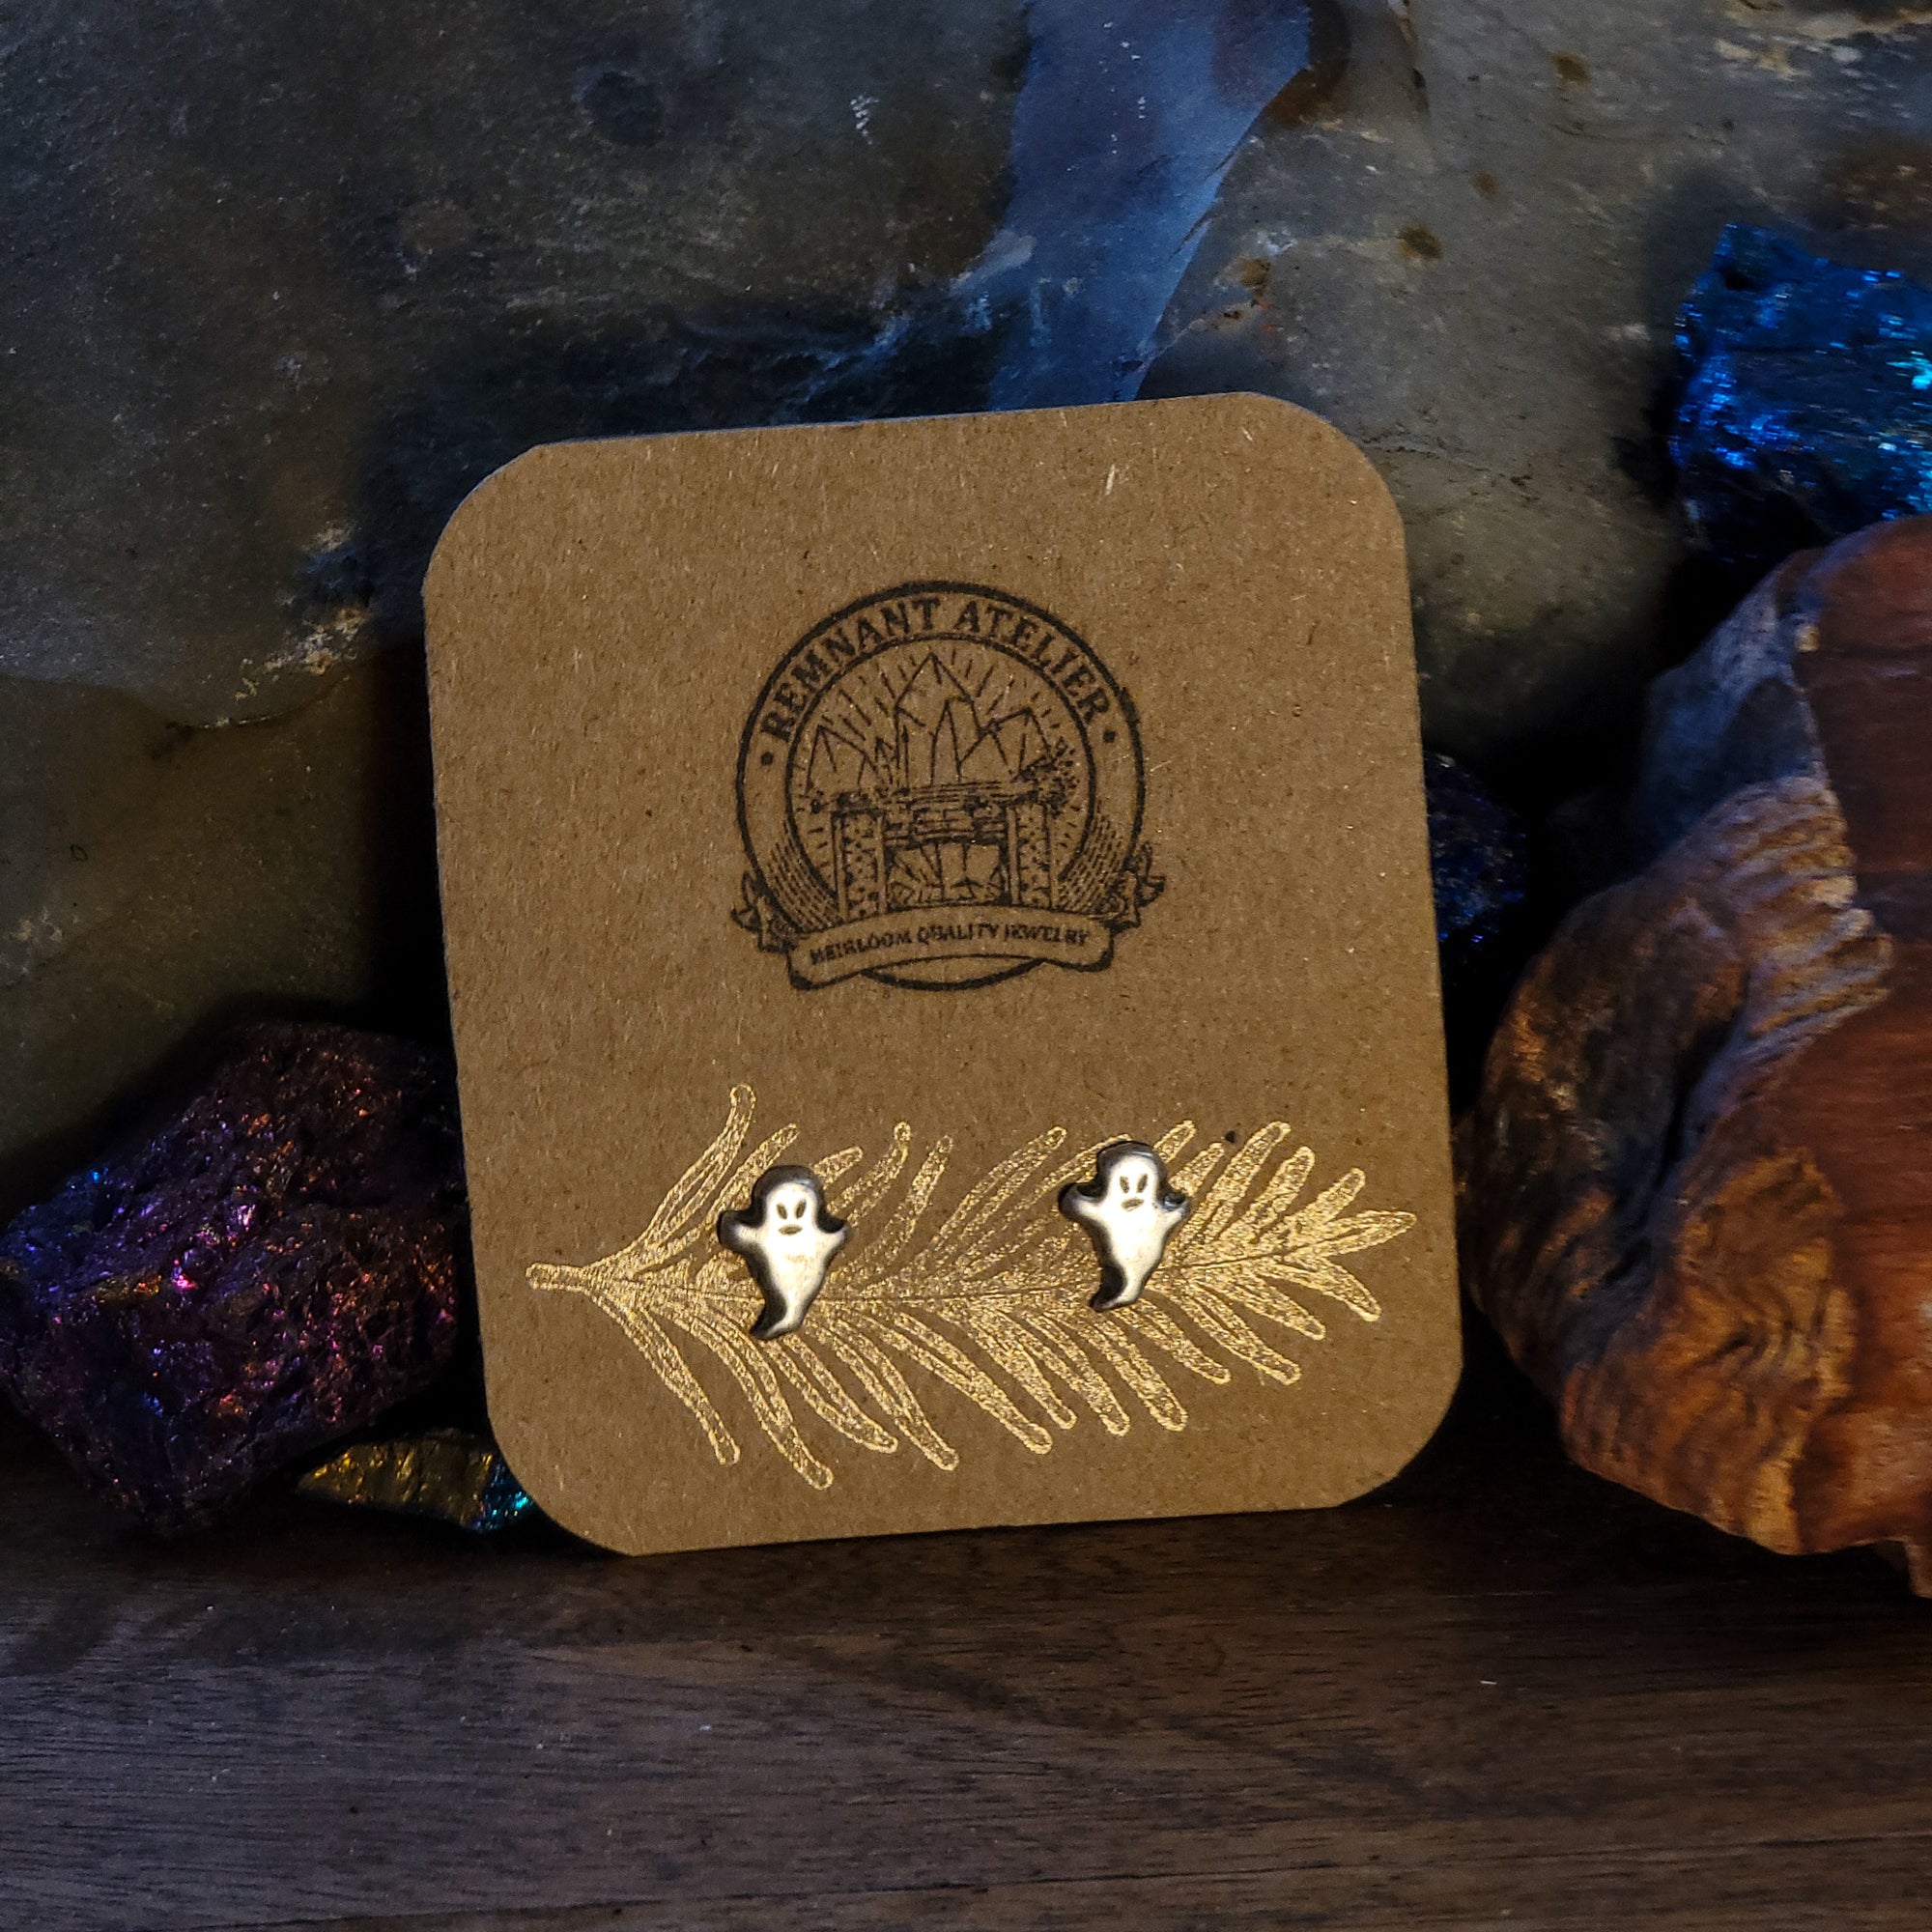 This photo features a pair of handmade sterling silver stud earrings in the shape of grinning ghosts, displayed on a cardboard earring card and surrounded by sparkling crystals.